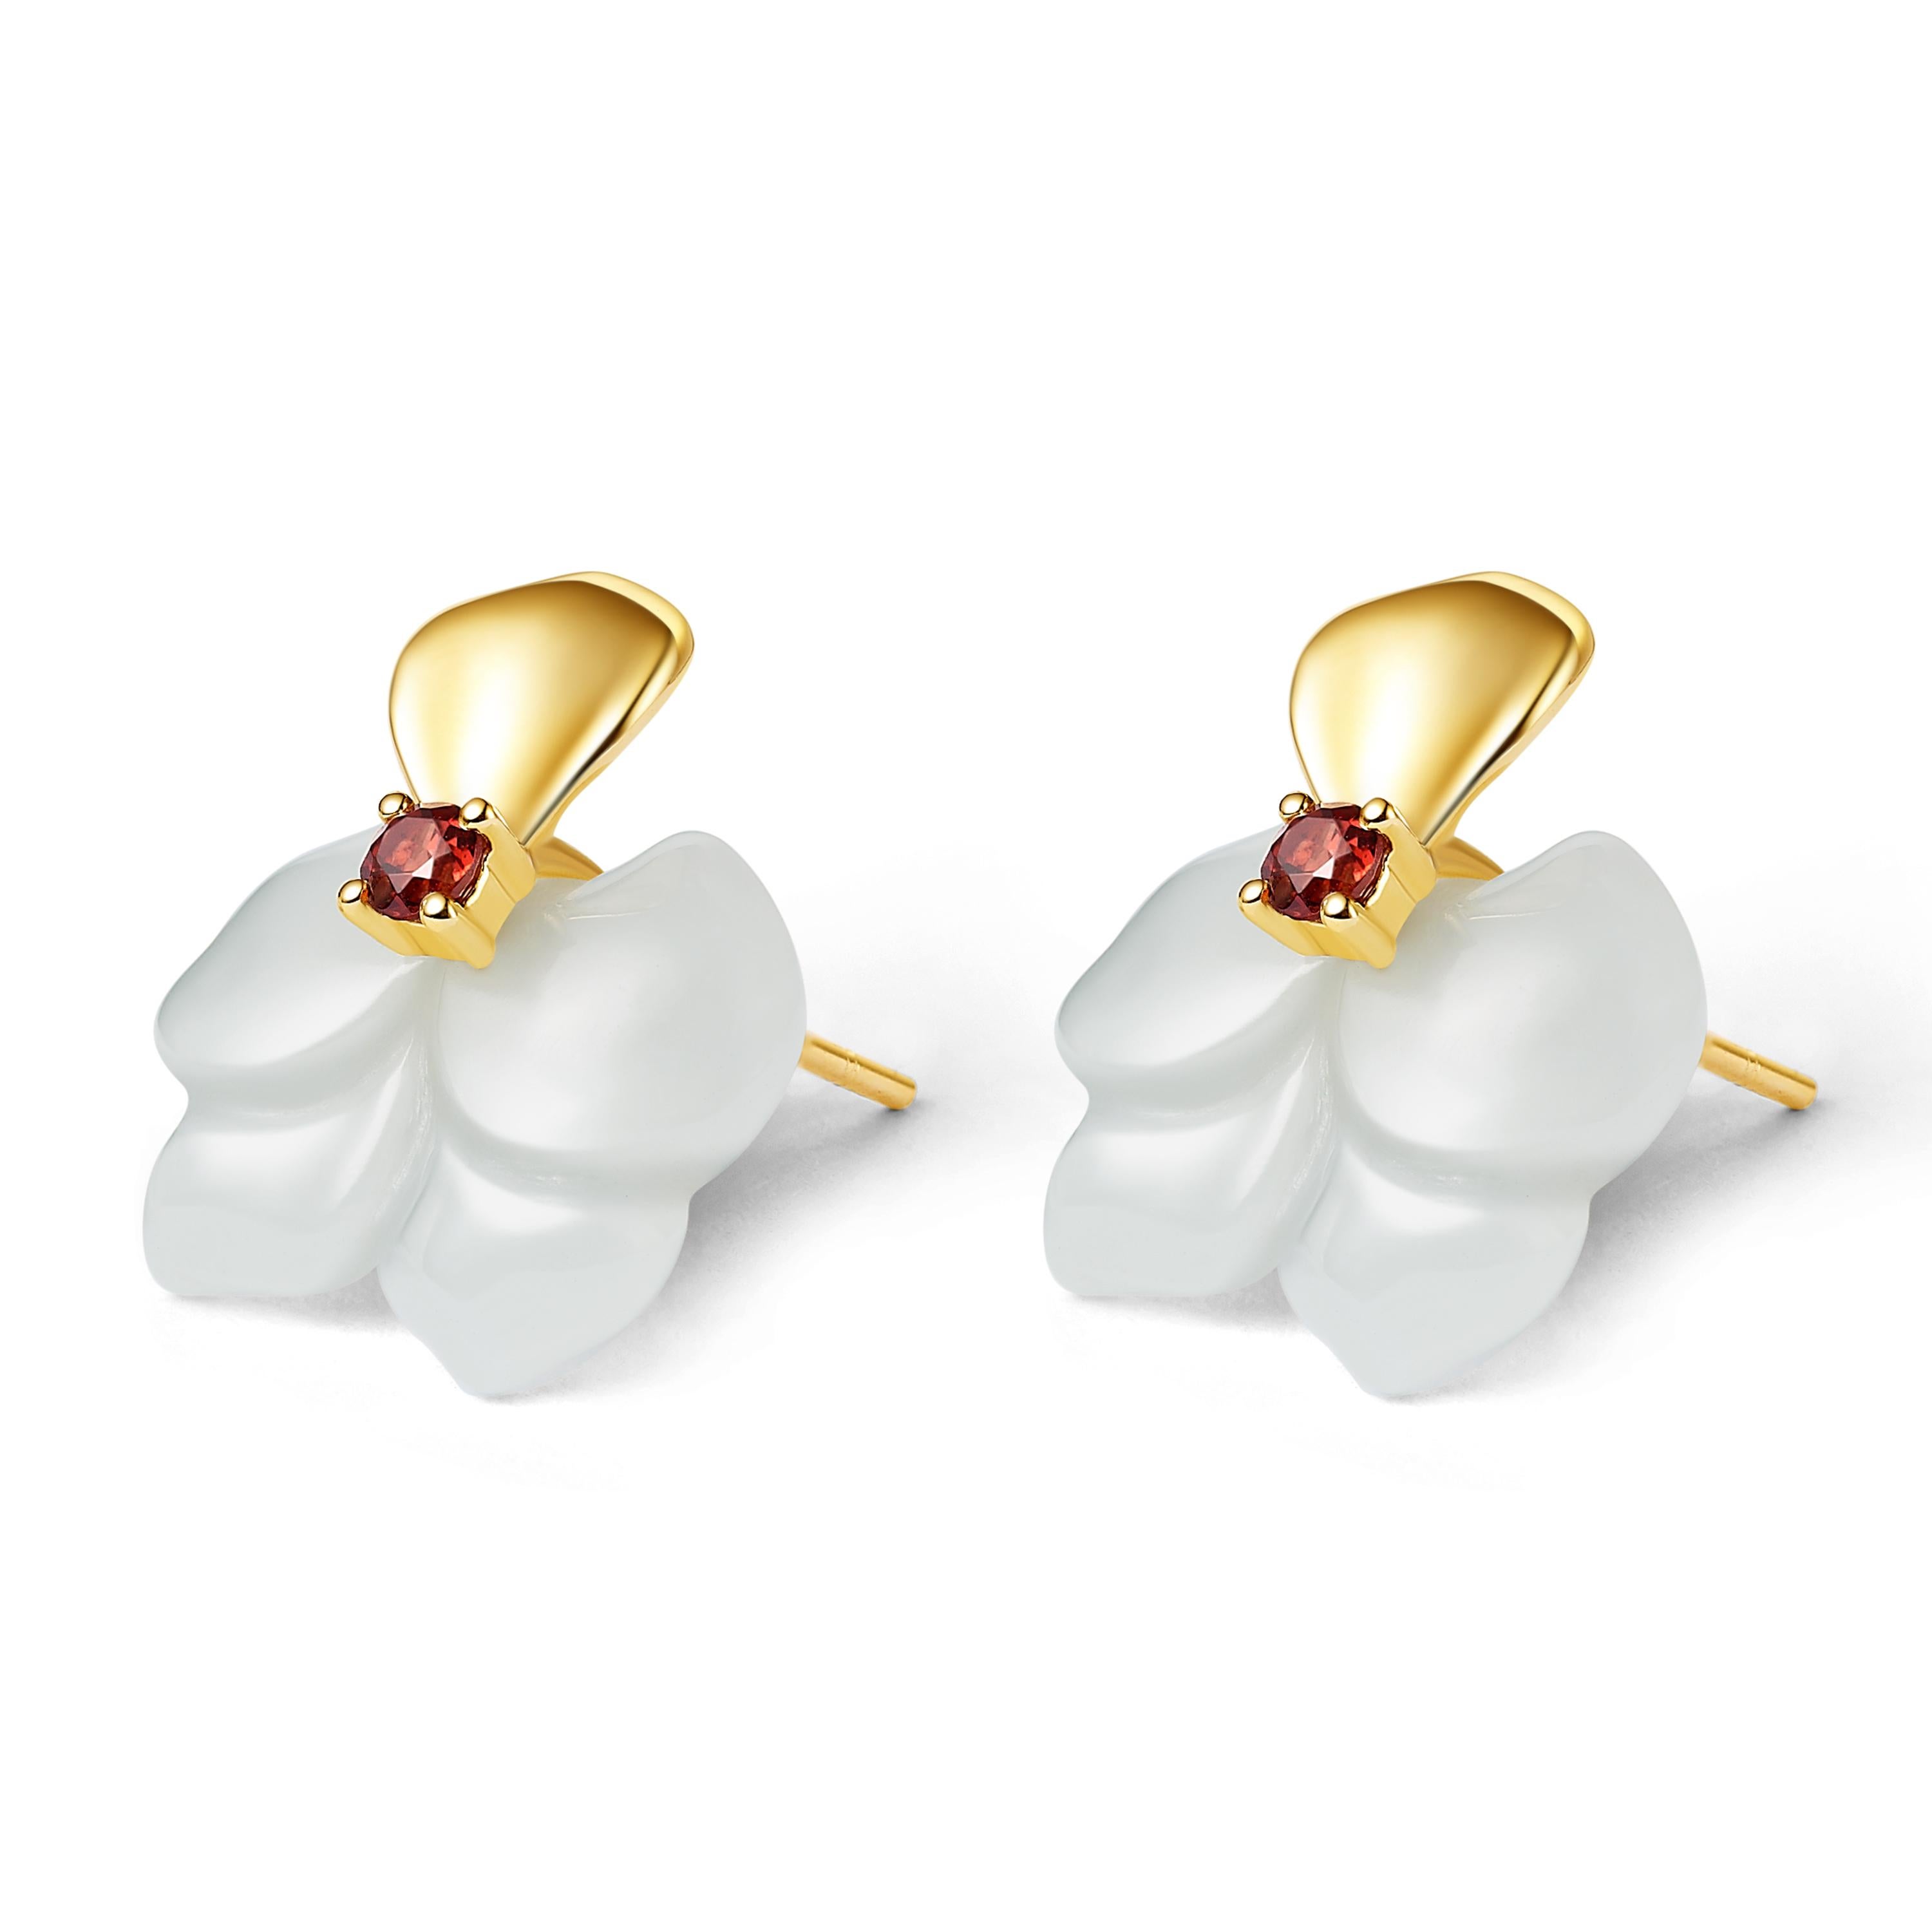 Description:
Orchid stud earrings with orchid carved Russian nephrite and red garnets, set in 14 karat yellow gold.

Inspiration:
A collection inspired by the exotic orchid flowers. White orchids serve as a symbol of elegance and love. The Fei Liu